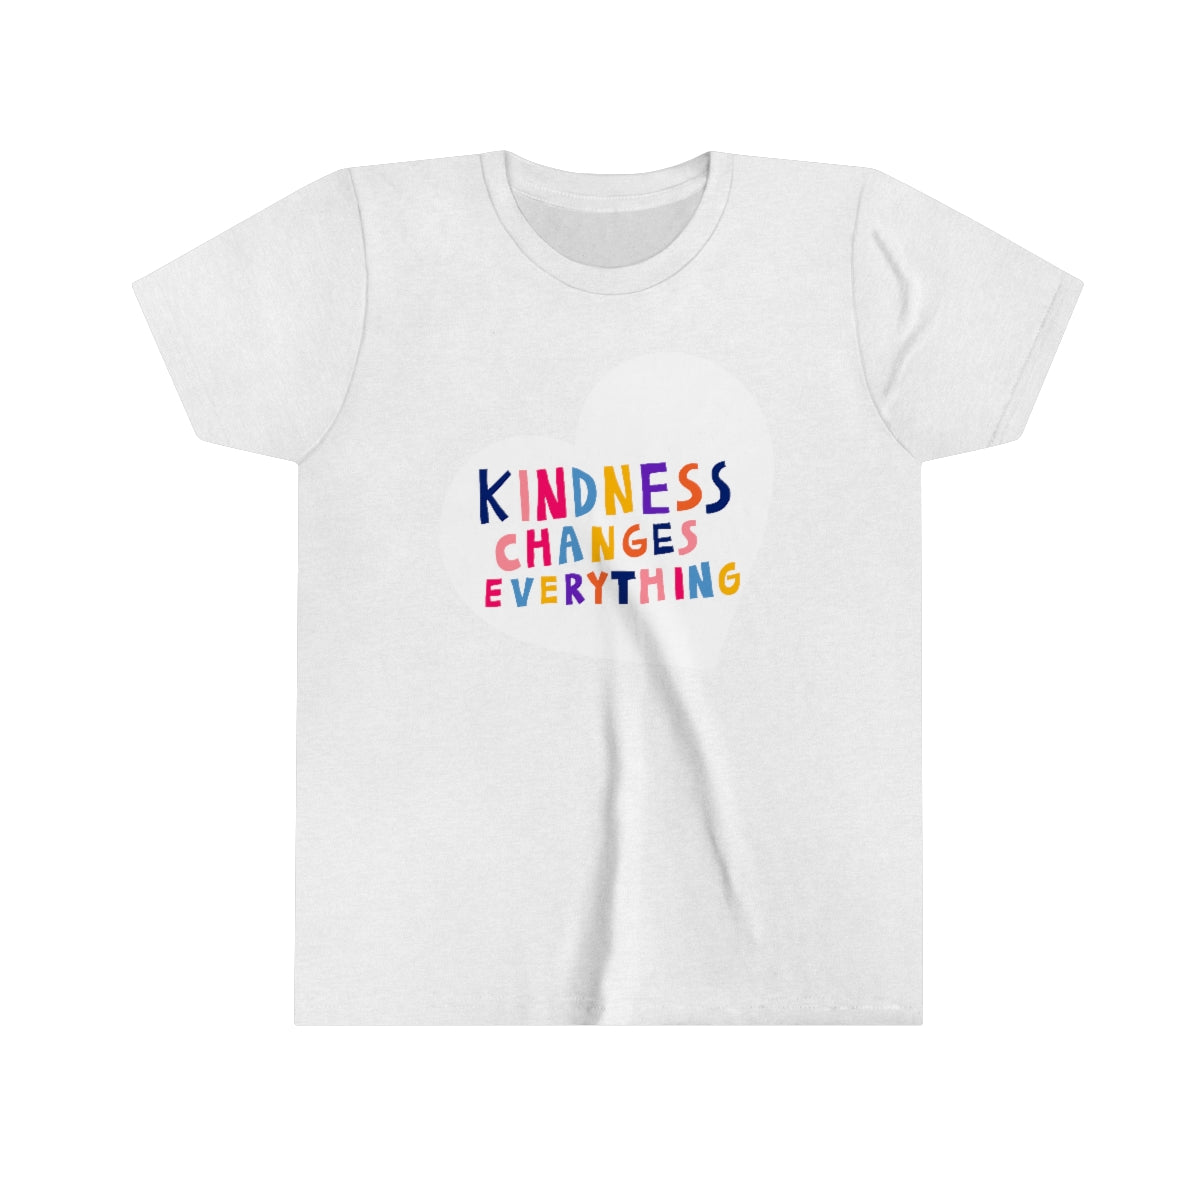 Youth Short Sleeve Tee "Pink shirt DAY Kindness changes everything"